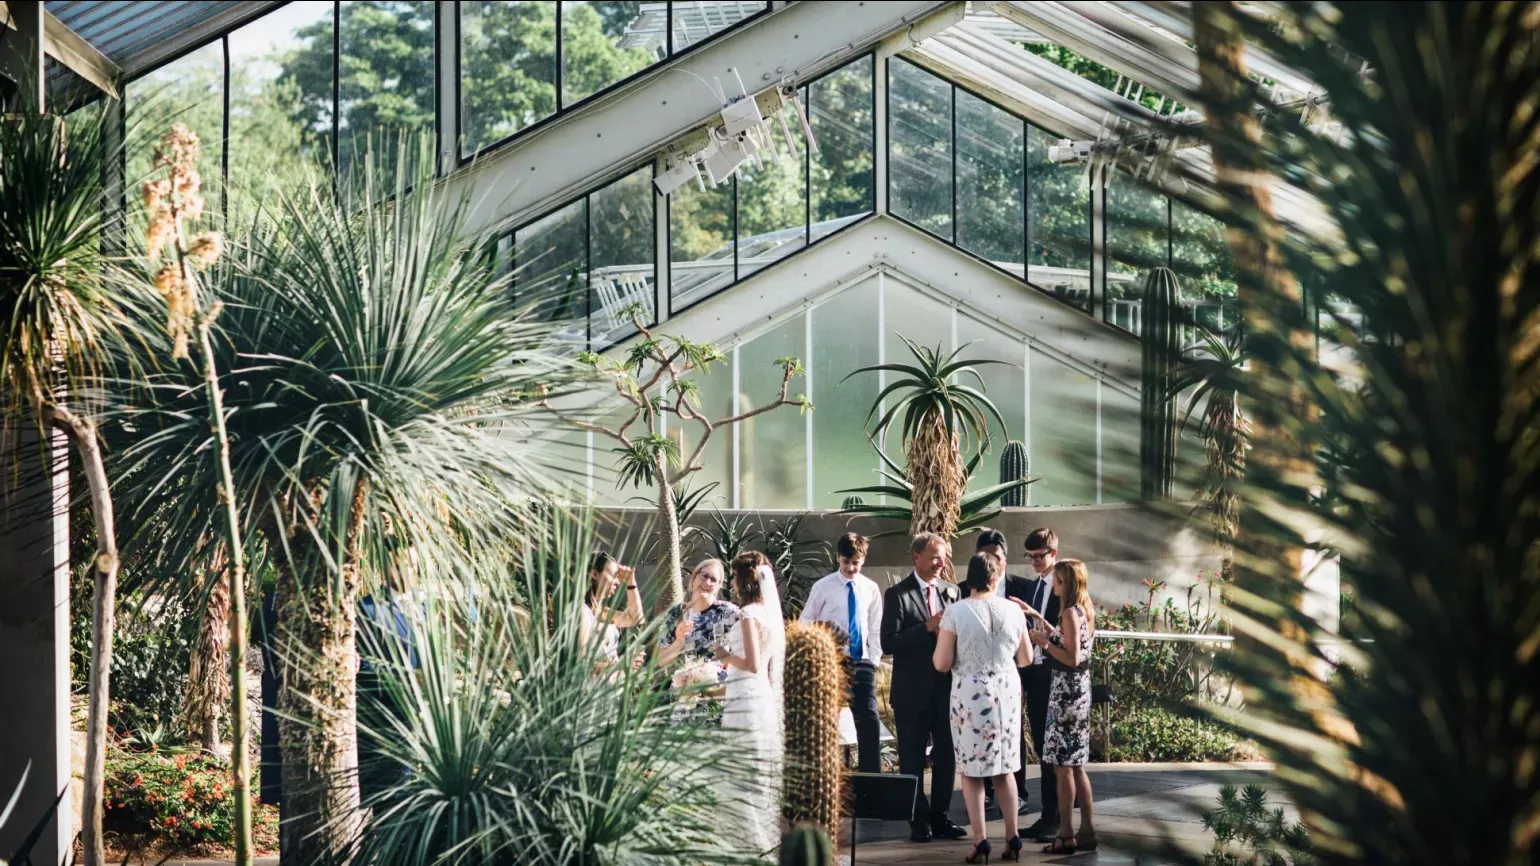 A group of people stand in the princess of wales conservatory at kew gardens